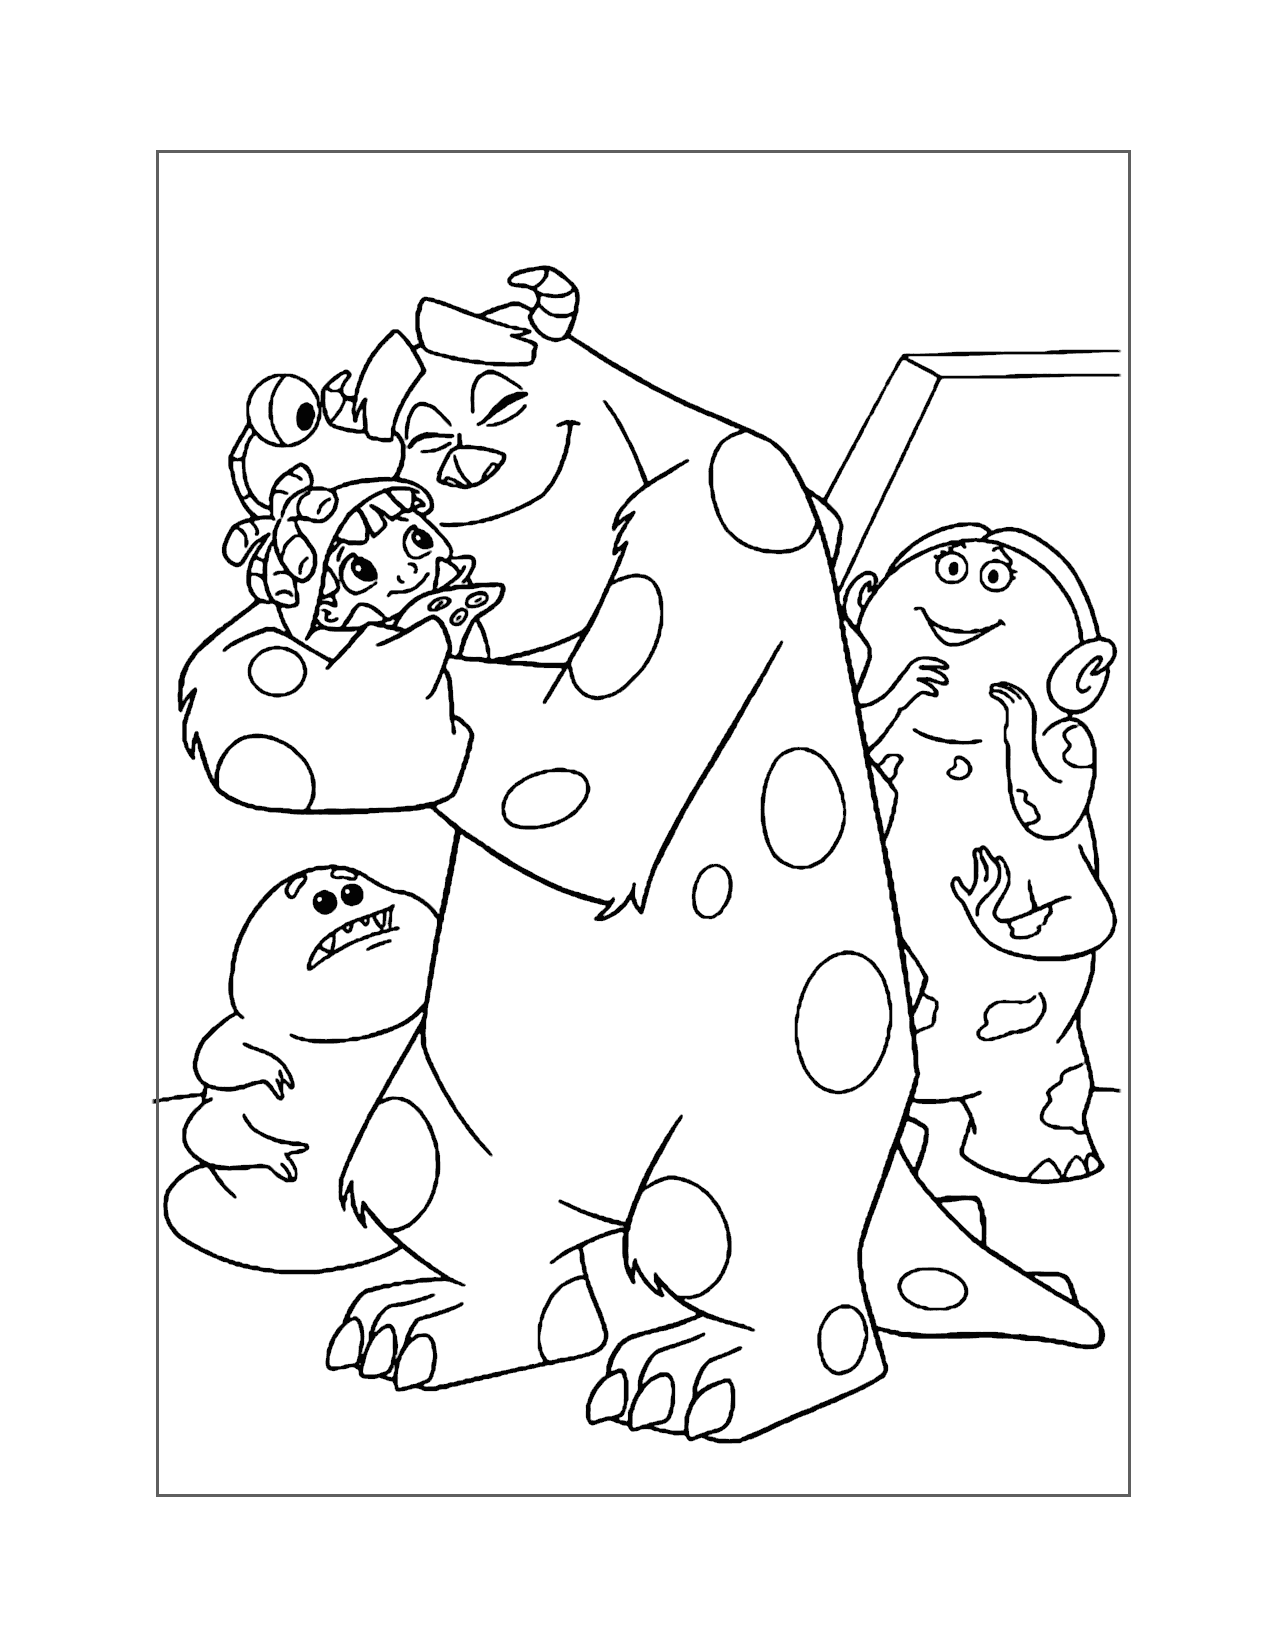 Sully Hugs Boo Coloring Pag